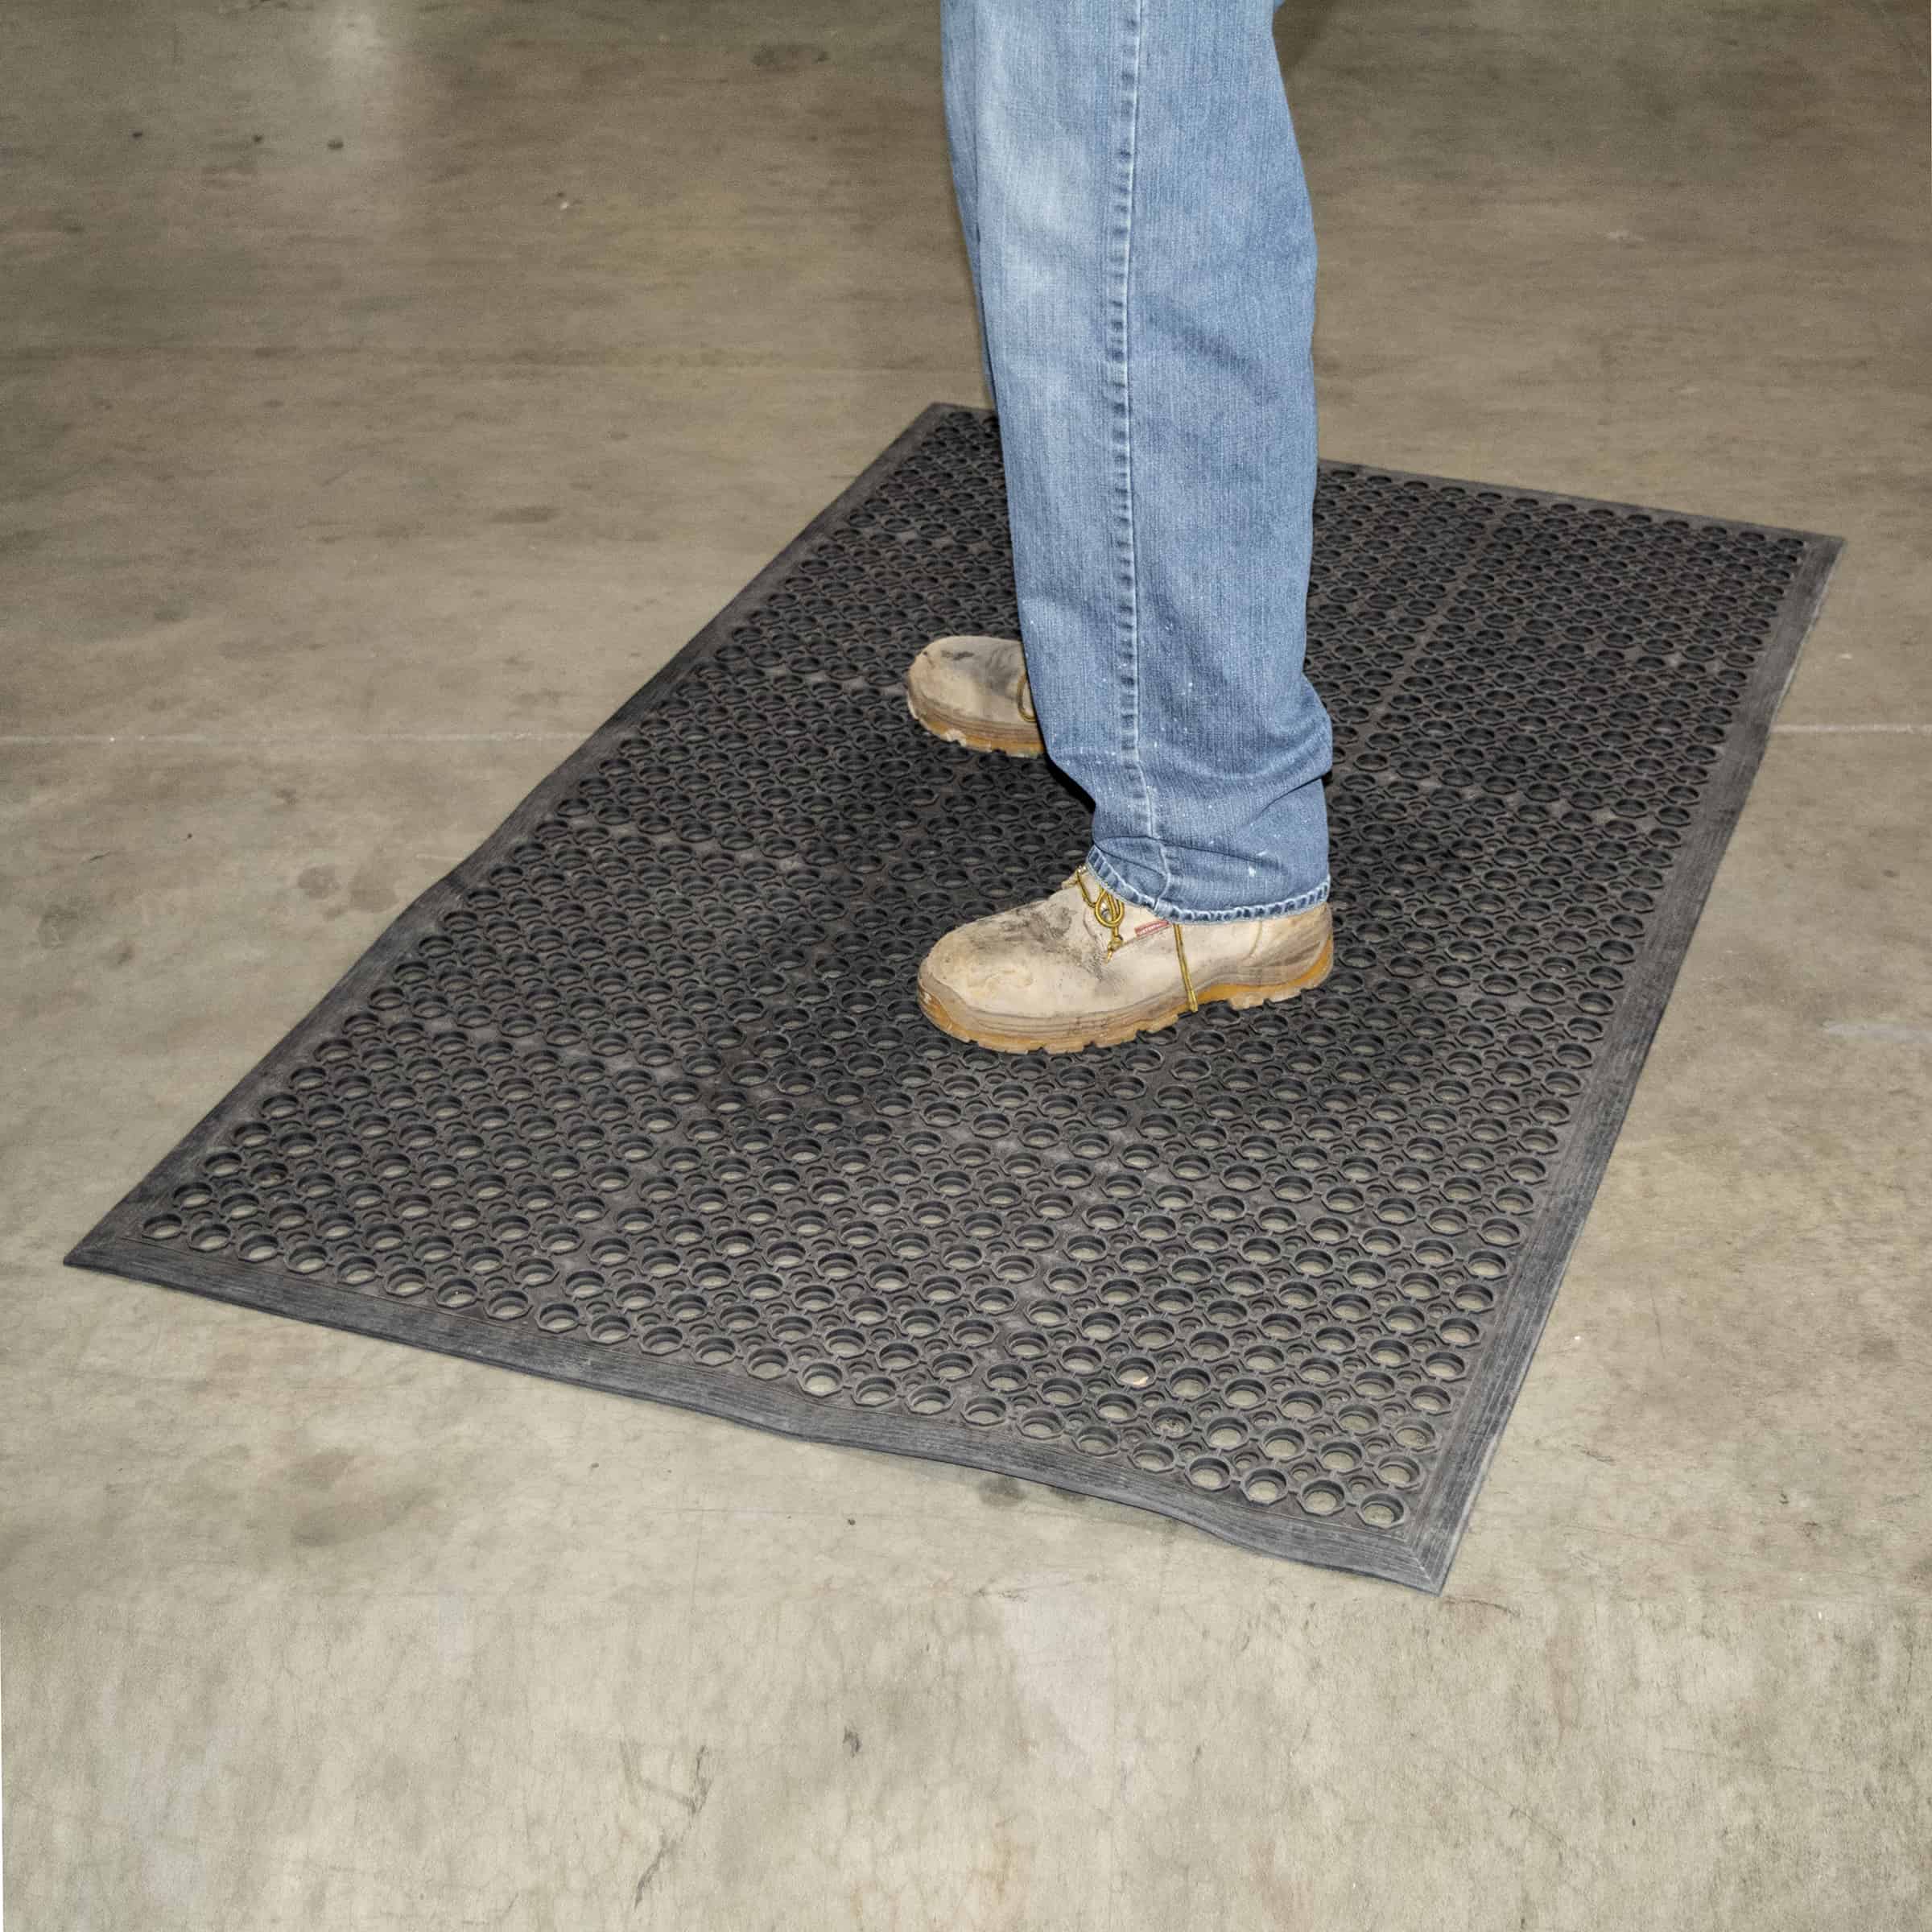 American Floor Mats Slip Resistant Black 3' x 5' Rubber Drainage Mat 3/8  inch Thickness